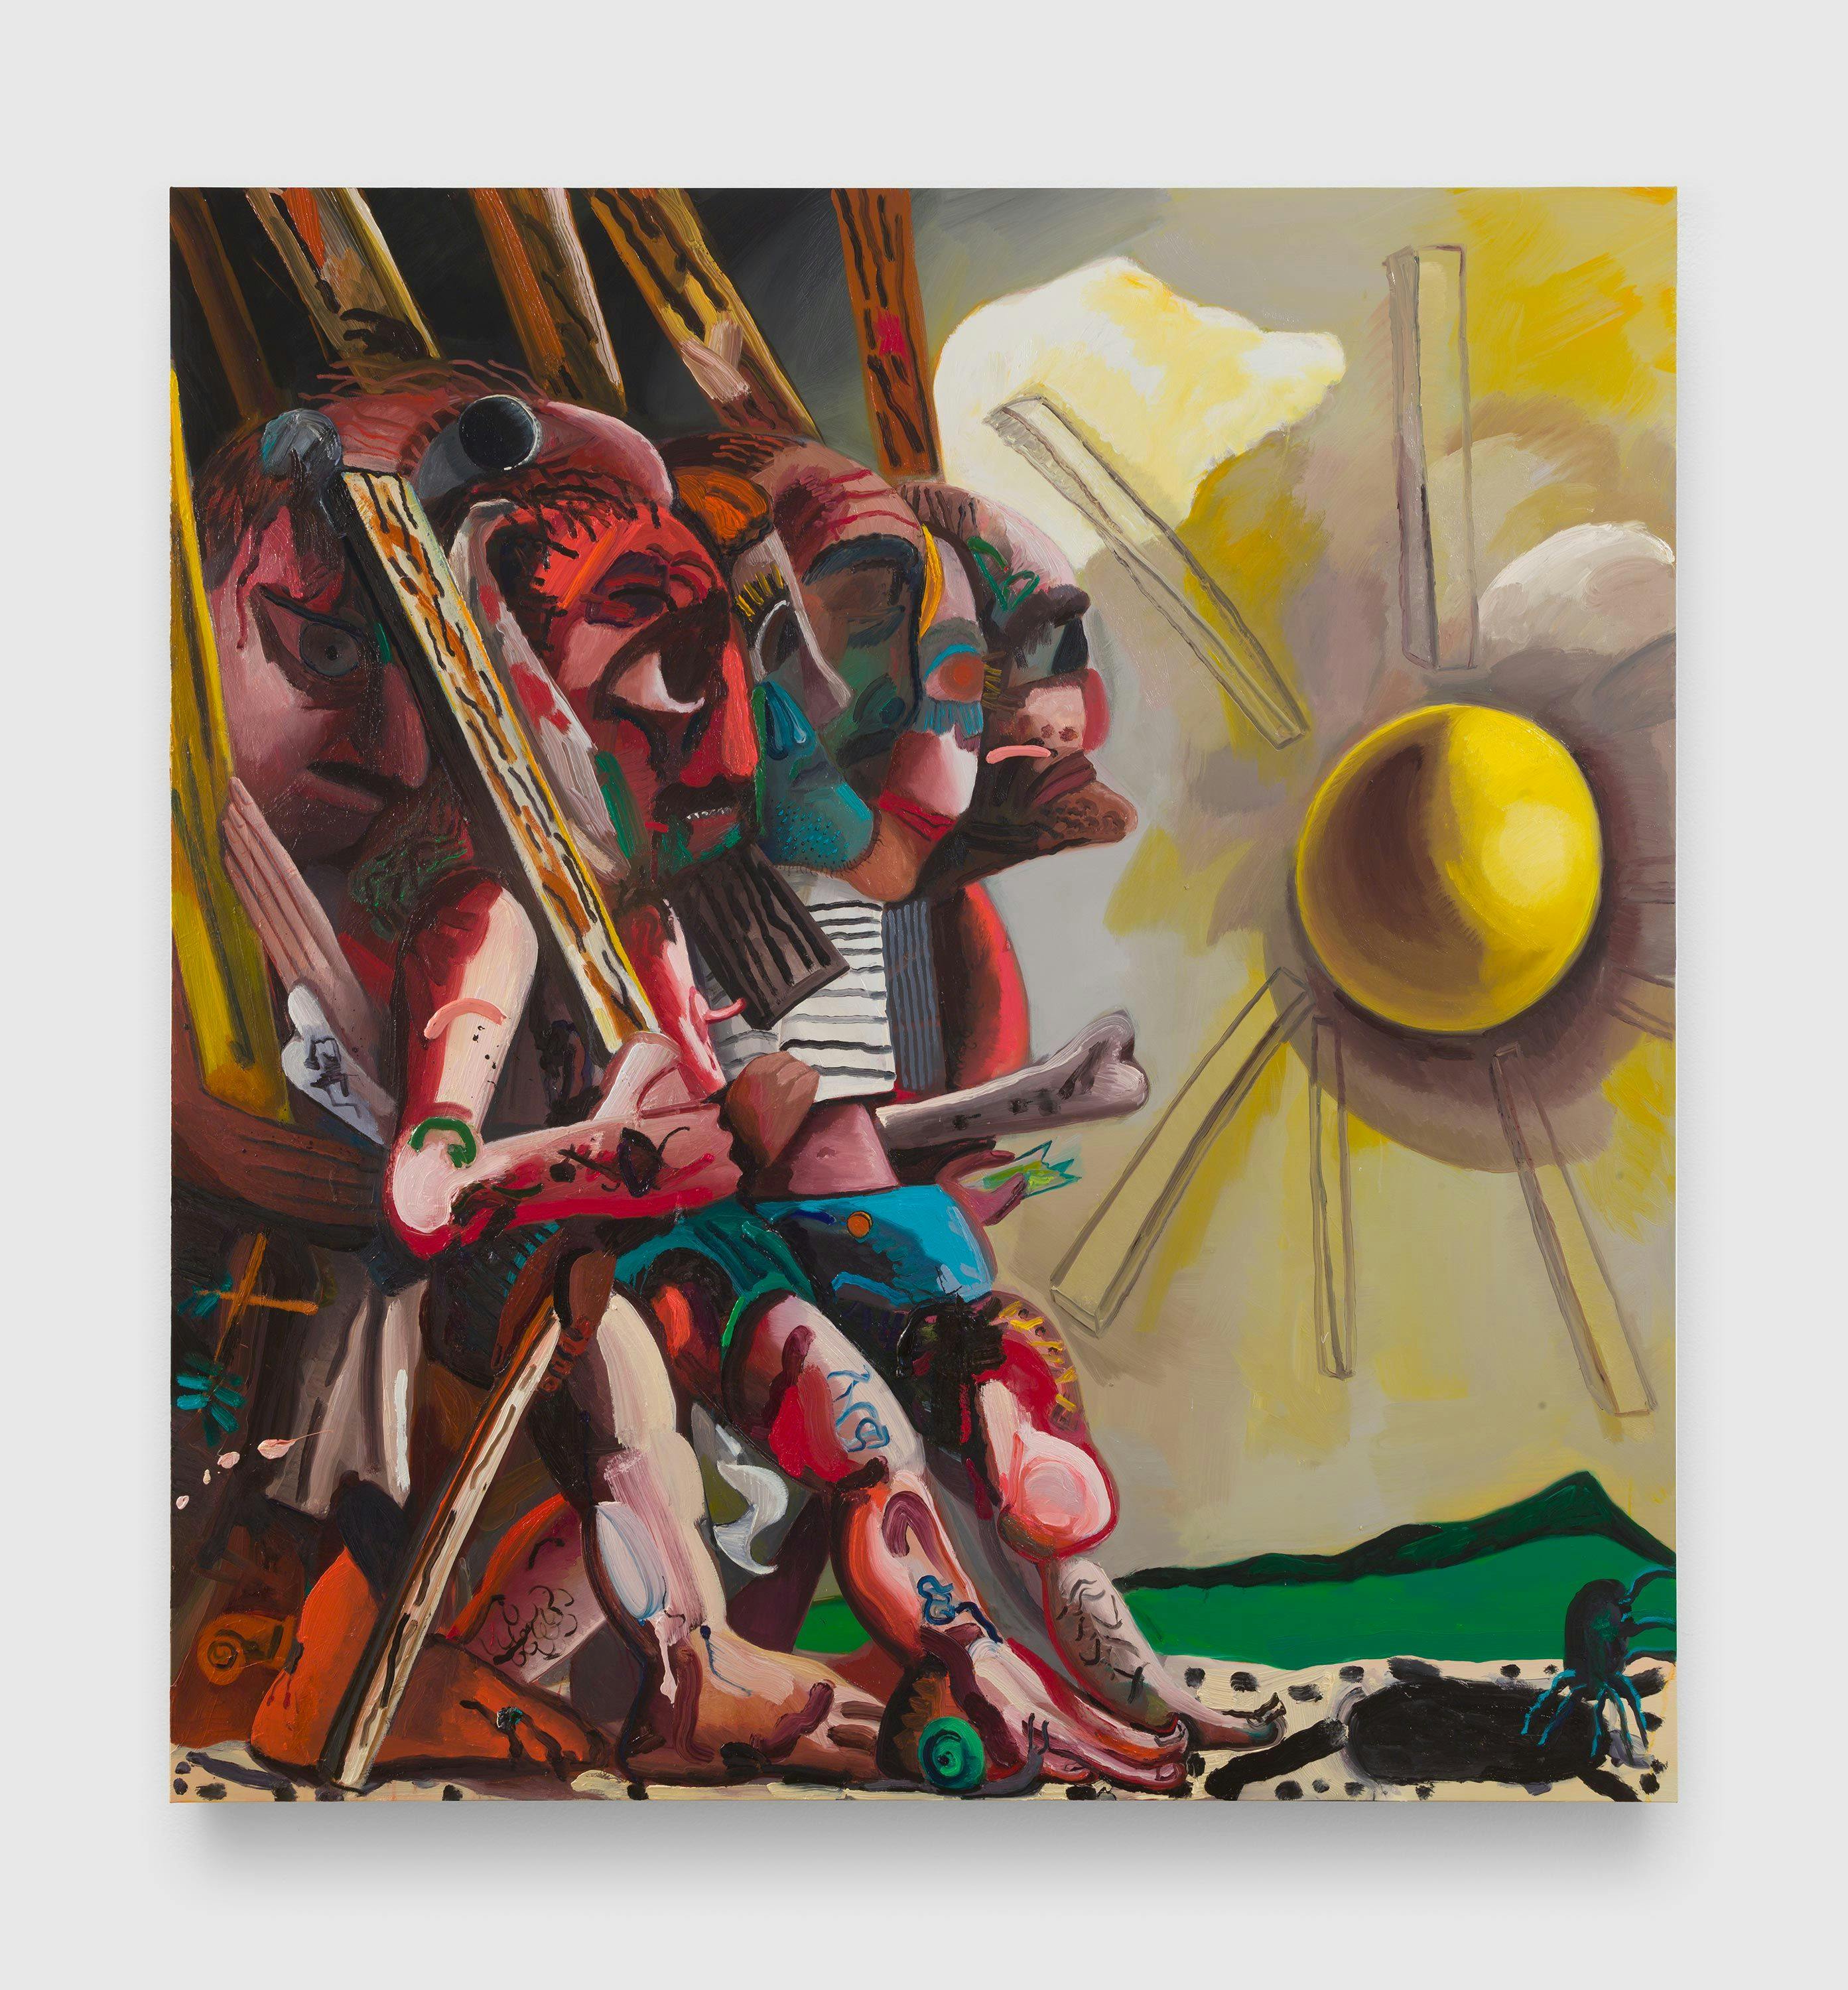 A painting by Dana Schutz, titled Beat Out the Sun, dated 2018.